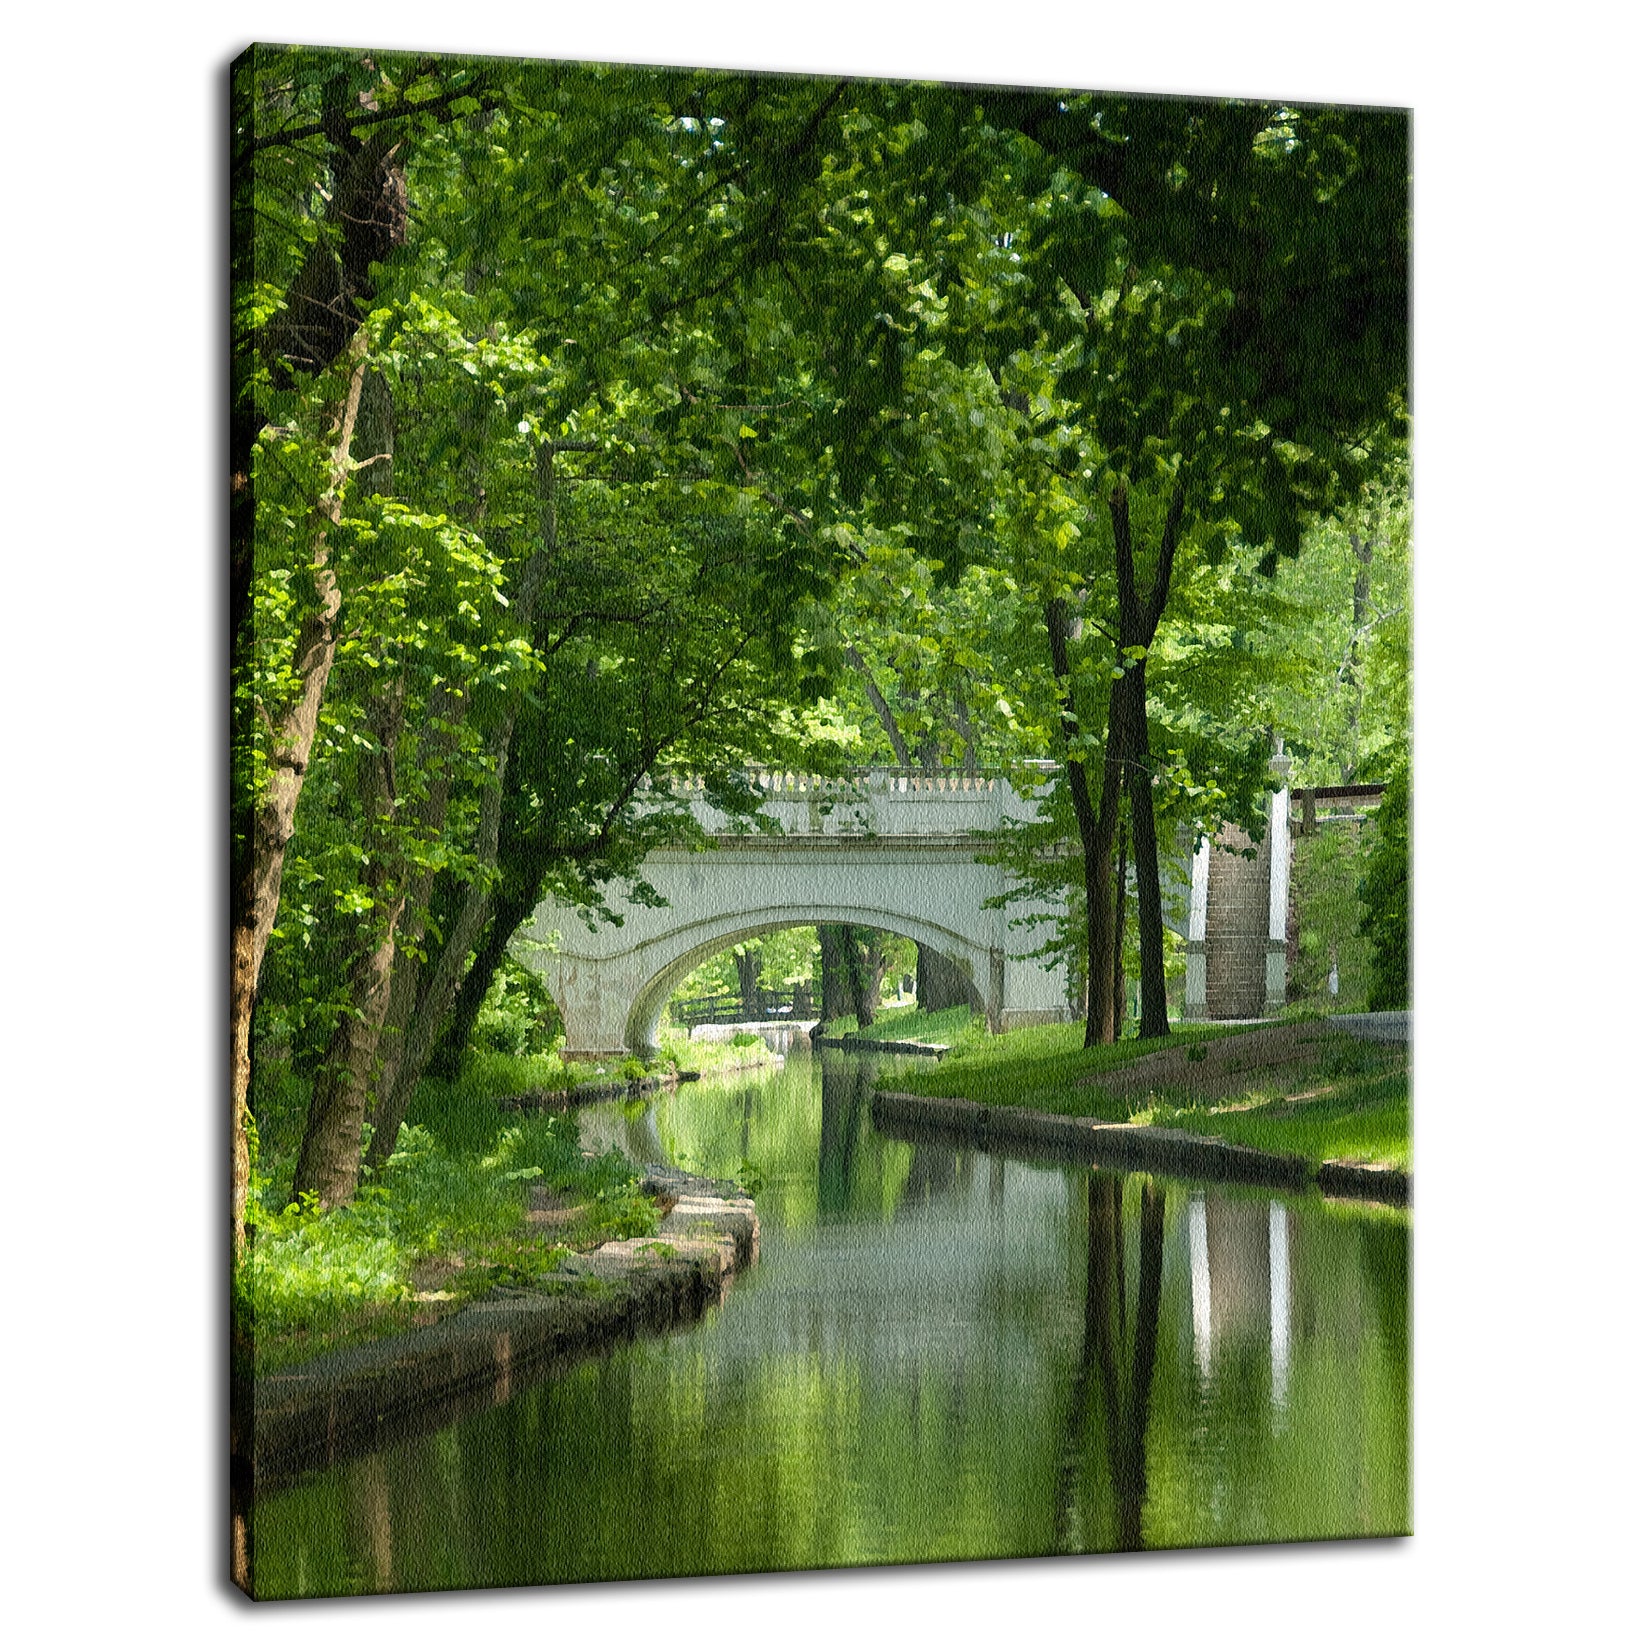 Greenery at Brandywine Abstract Photo Fine Art Canvas & Unframed Wall Art Prints  - PIPAFINEART